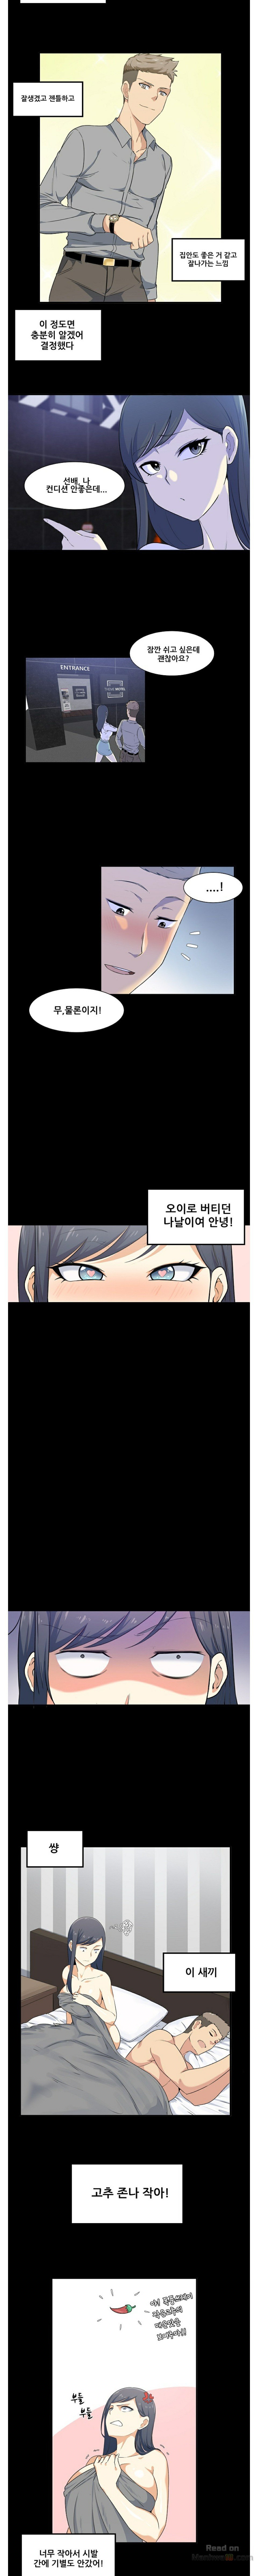 the-ark-is-me-raw-chap-3-10